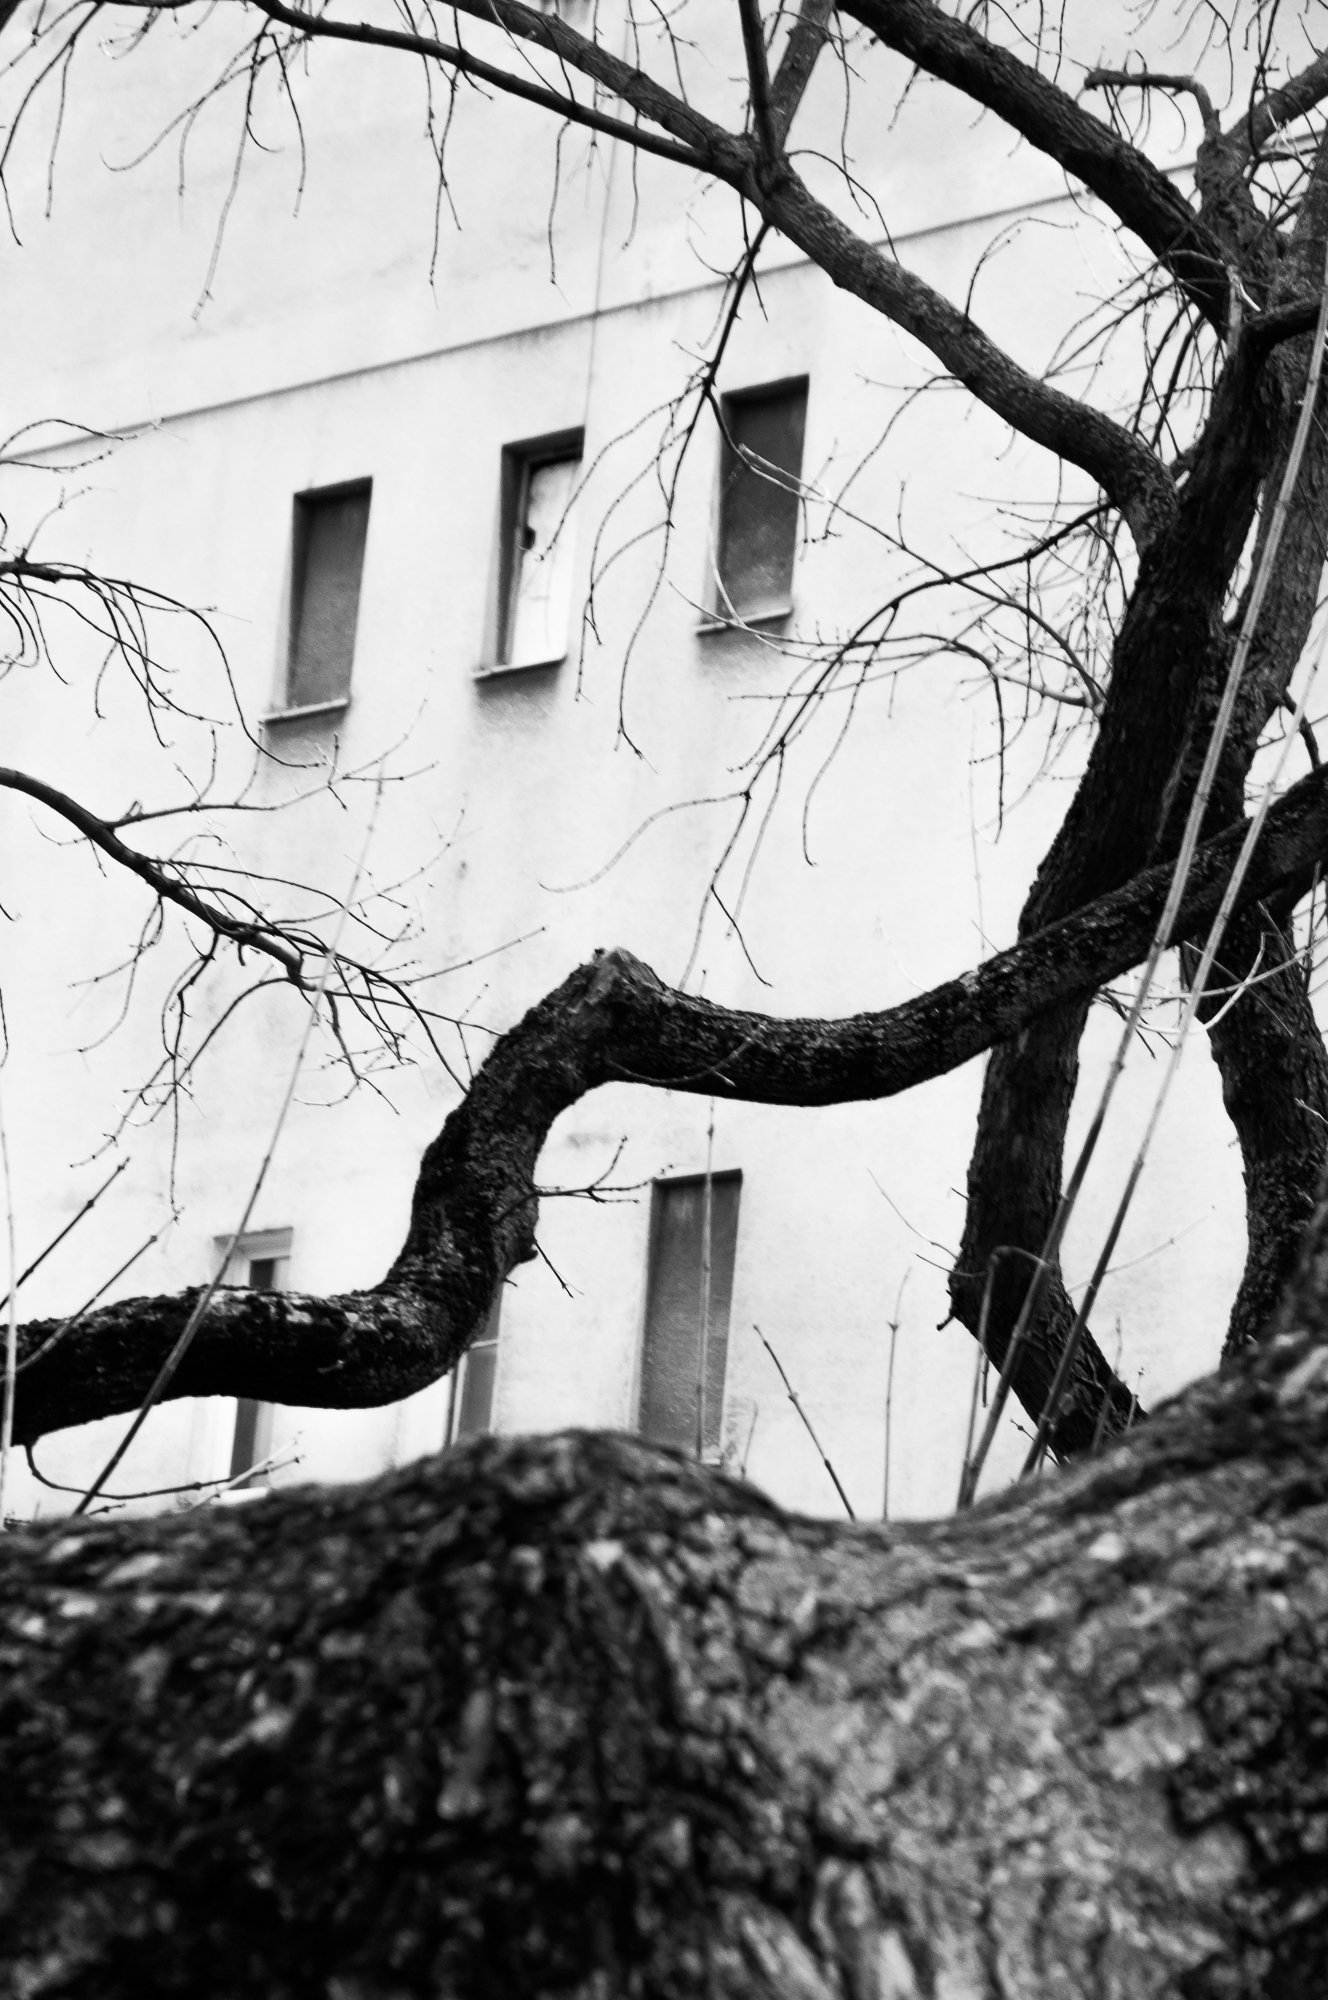 Adam Mazek Photography Warsaw (Warszawa) 2018 Post: "One of the most underrated activities." Walking. Minimalism. Perspective. Branches.